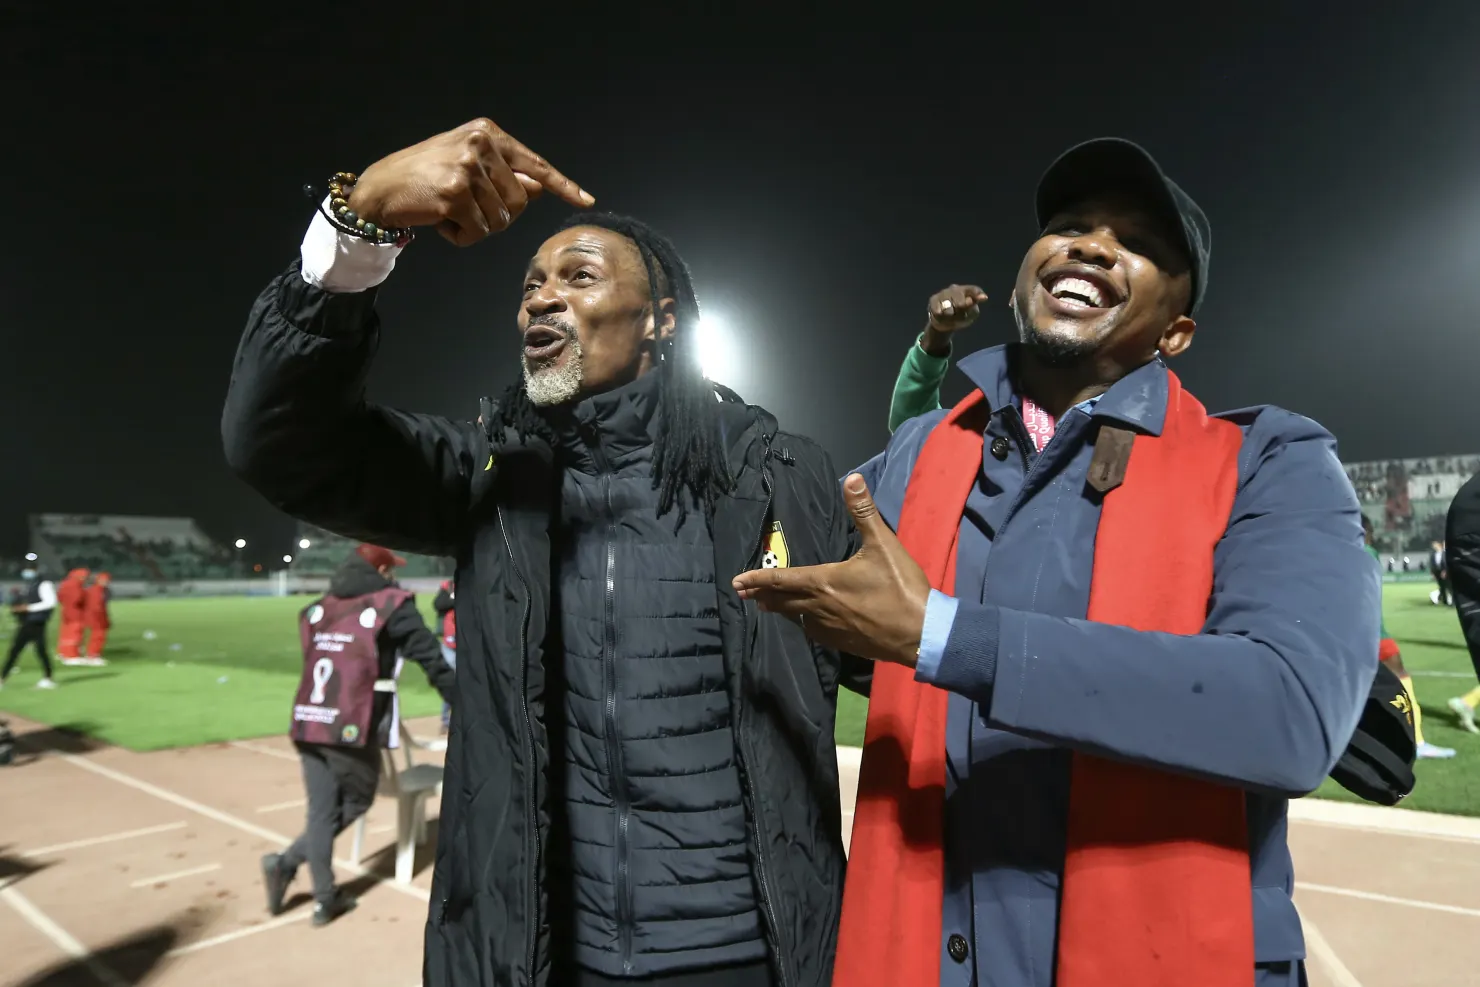 Samuel Eto’o, right, and Cameroon coach Rigobert Song celebrate after the controverisial win in the World Cup qualifying match against Algeria.CREDIT:AP